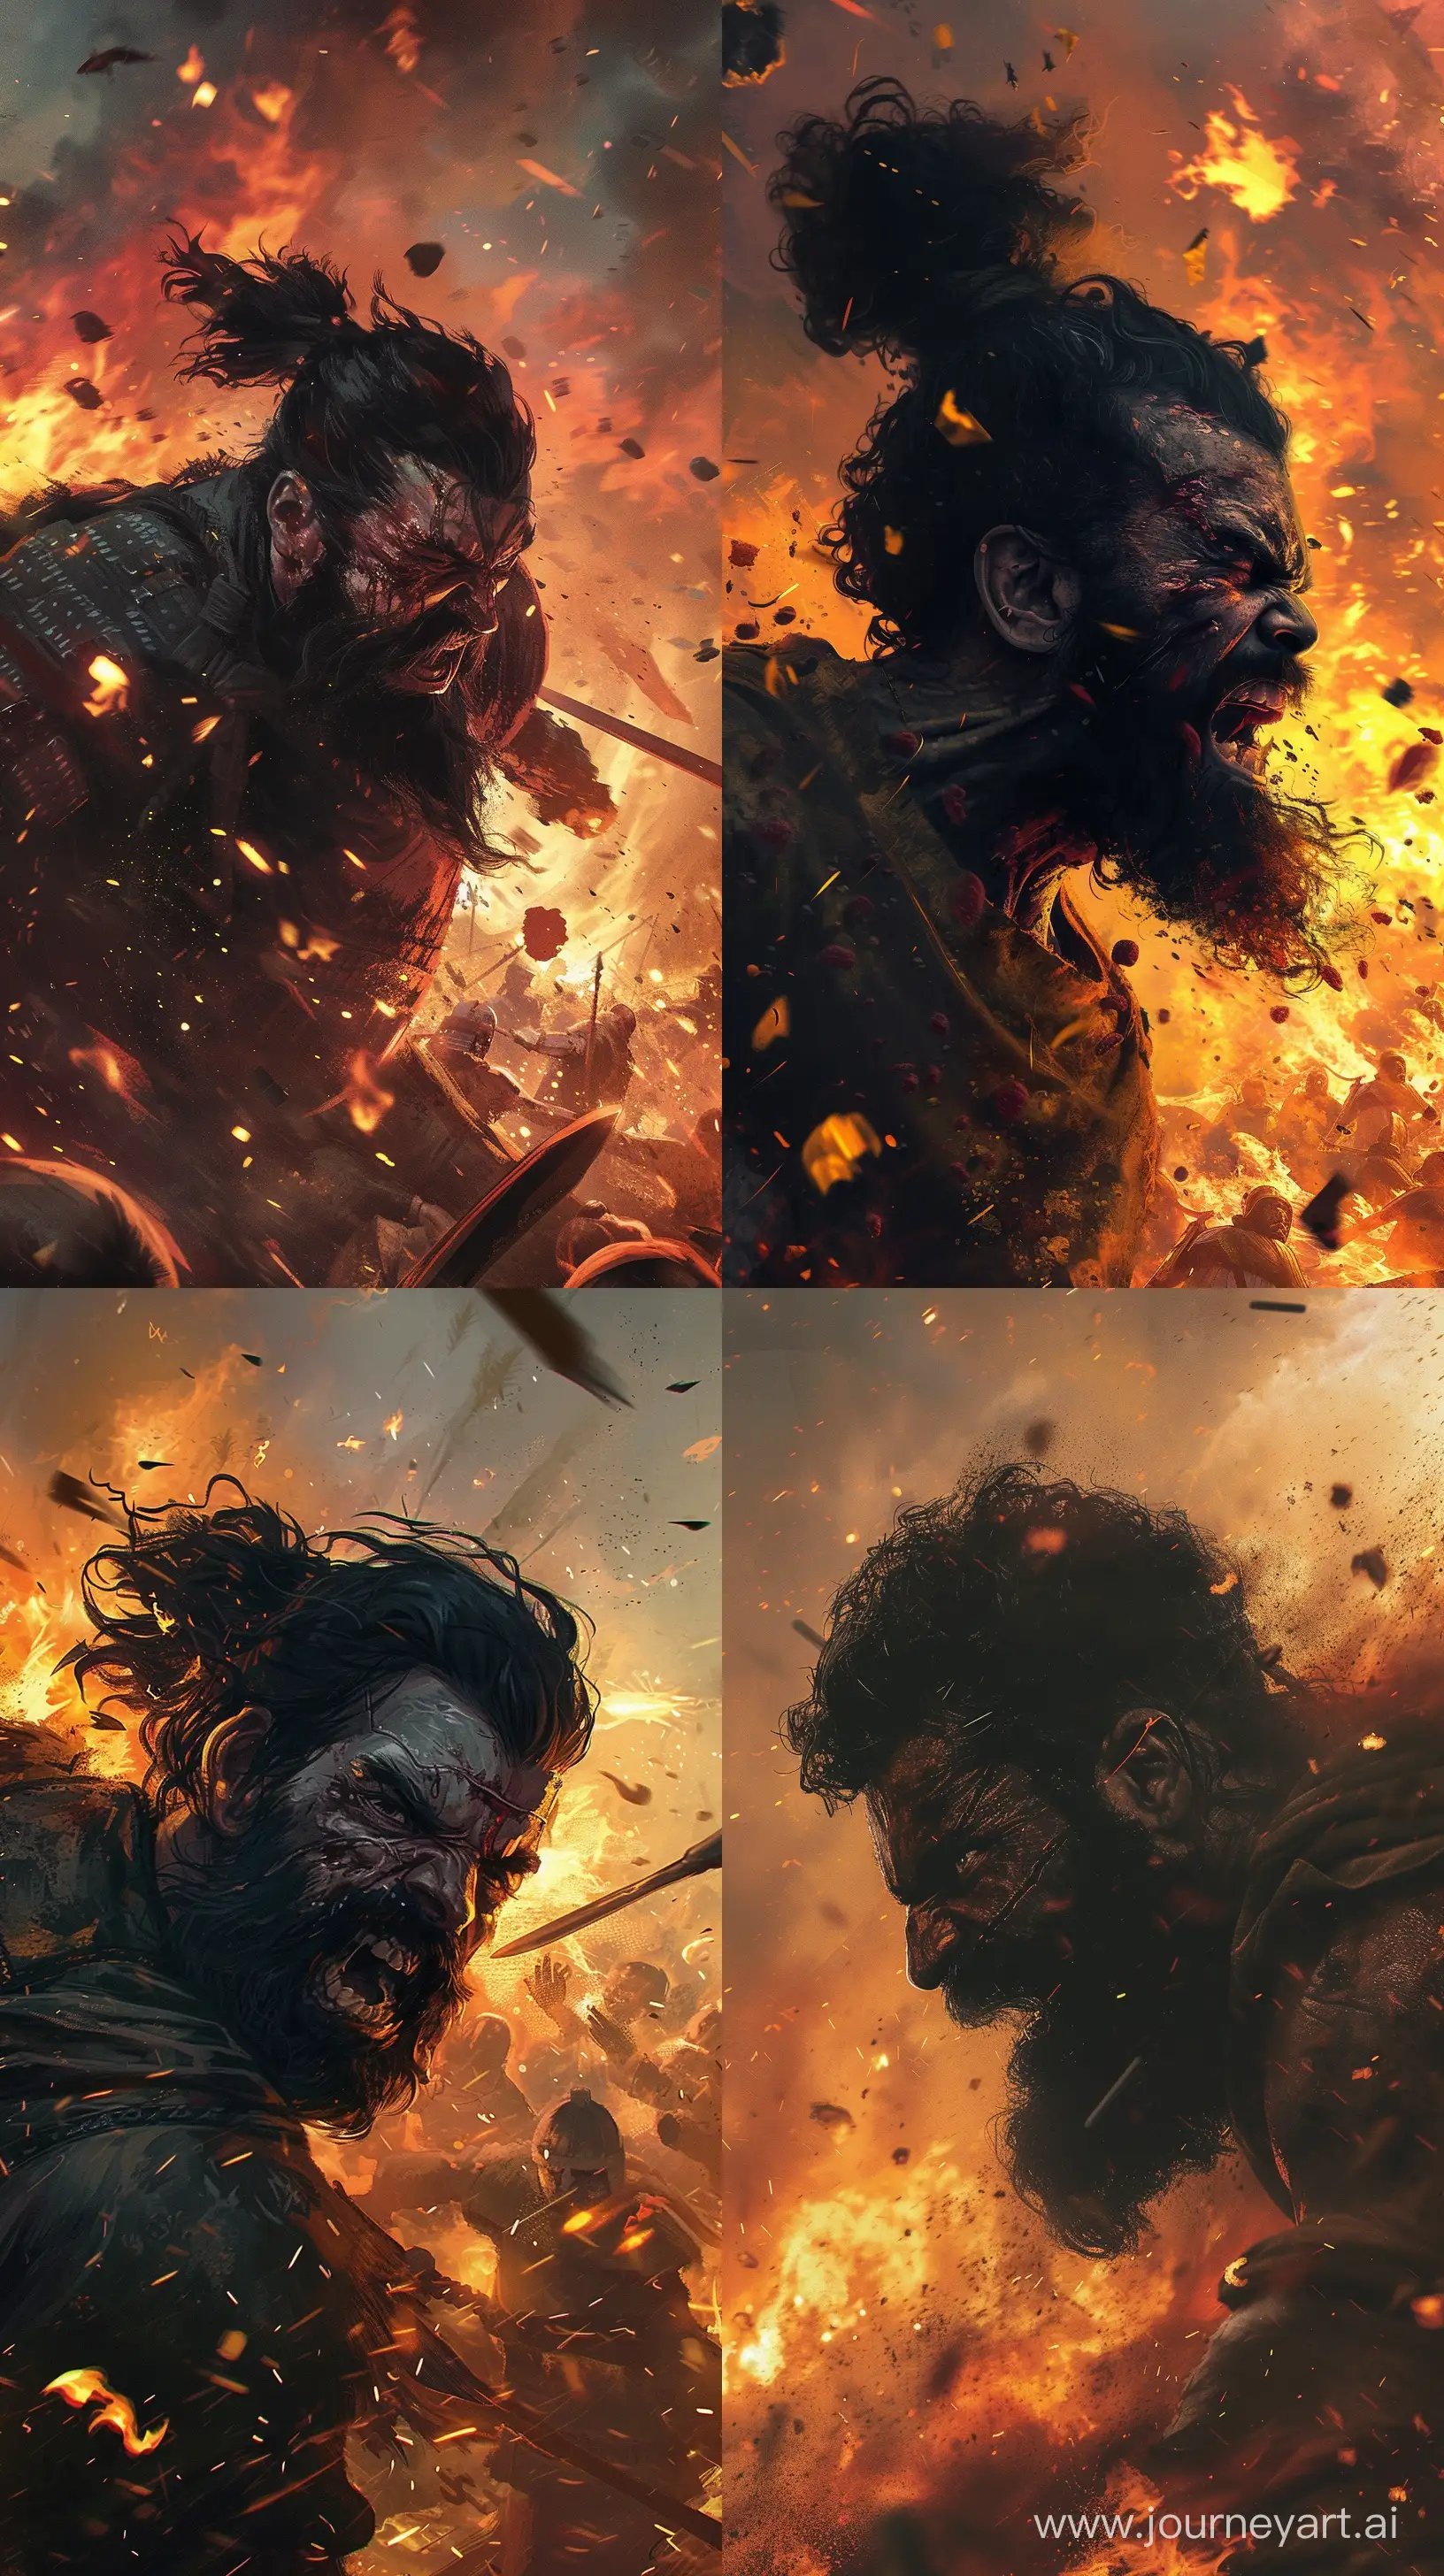 Intense-Battle-Scene-BlackHaired-Man-Confronts-Army-Amidst-Flames